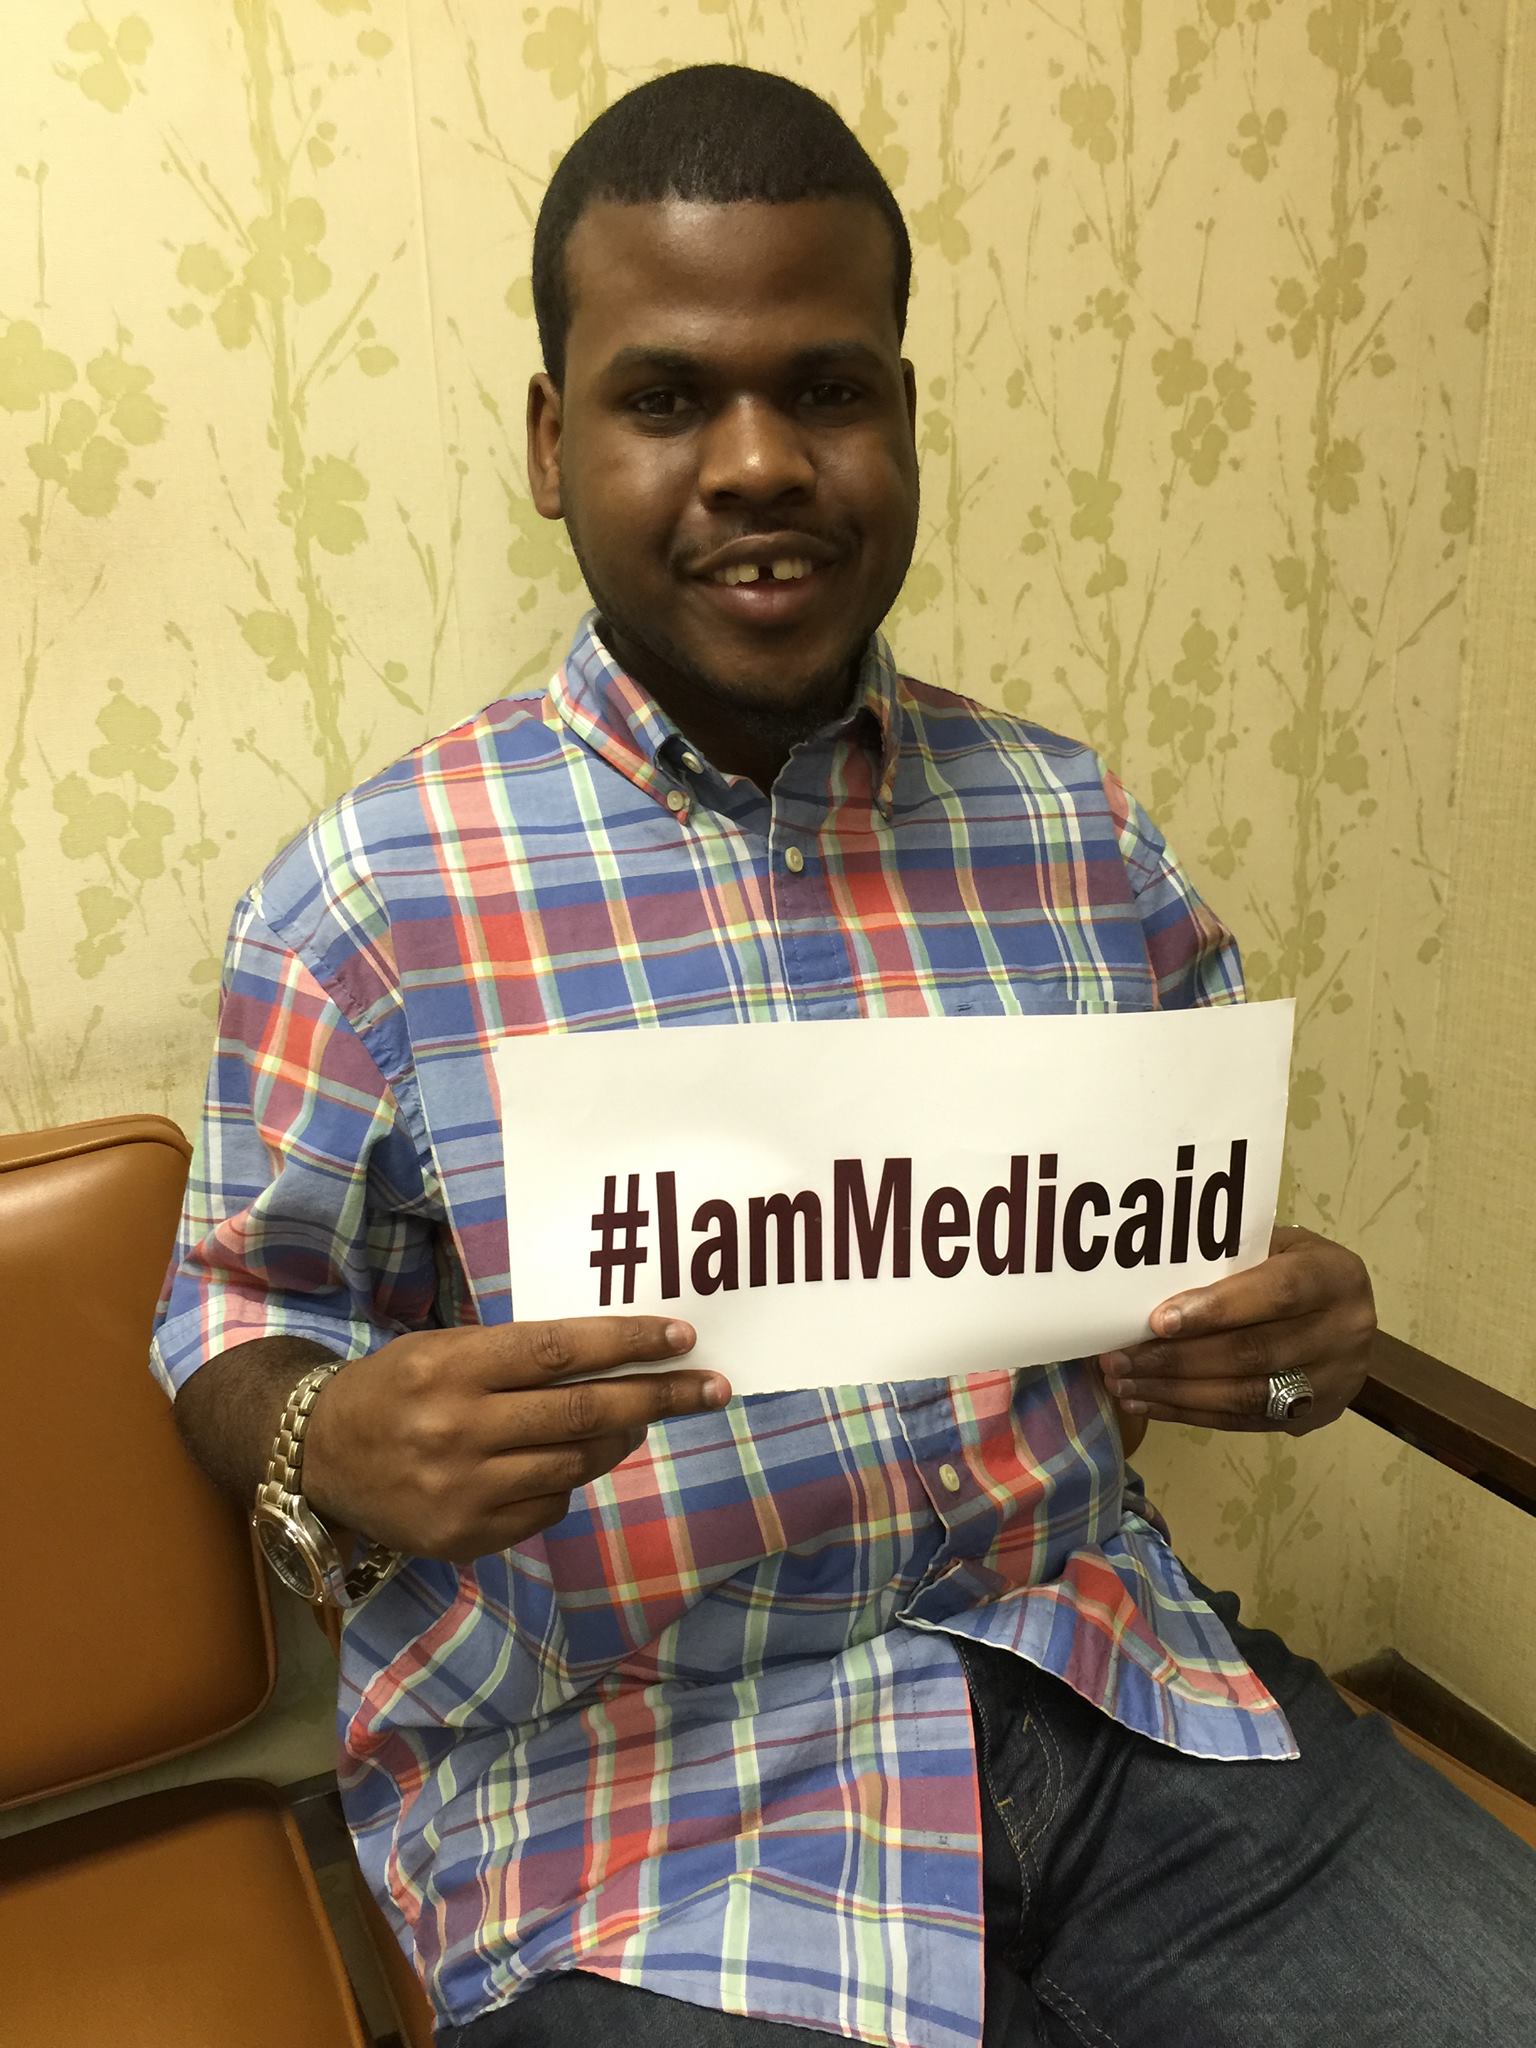  I was born with hydrocephalus and have 2 shunts. 3 years ago I developed a lymphoma. Thank you Medicaid for my care!  ‪   ‪#‎IamMedicaid &nbsp; 